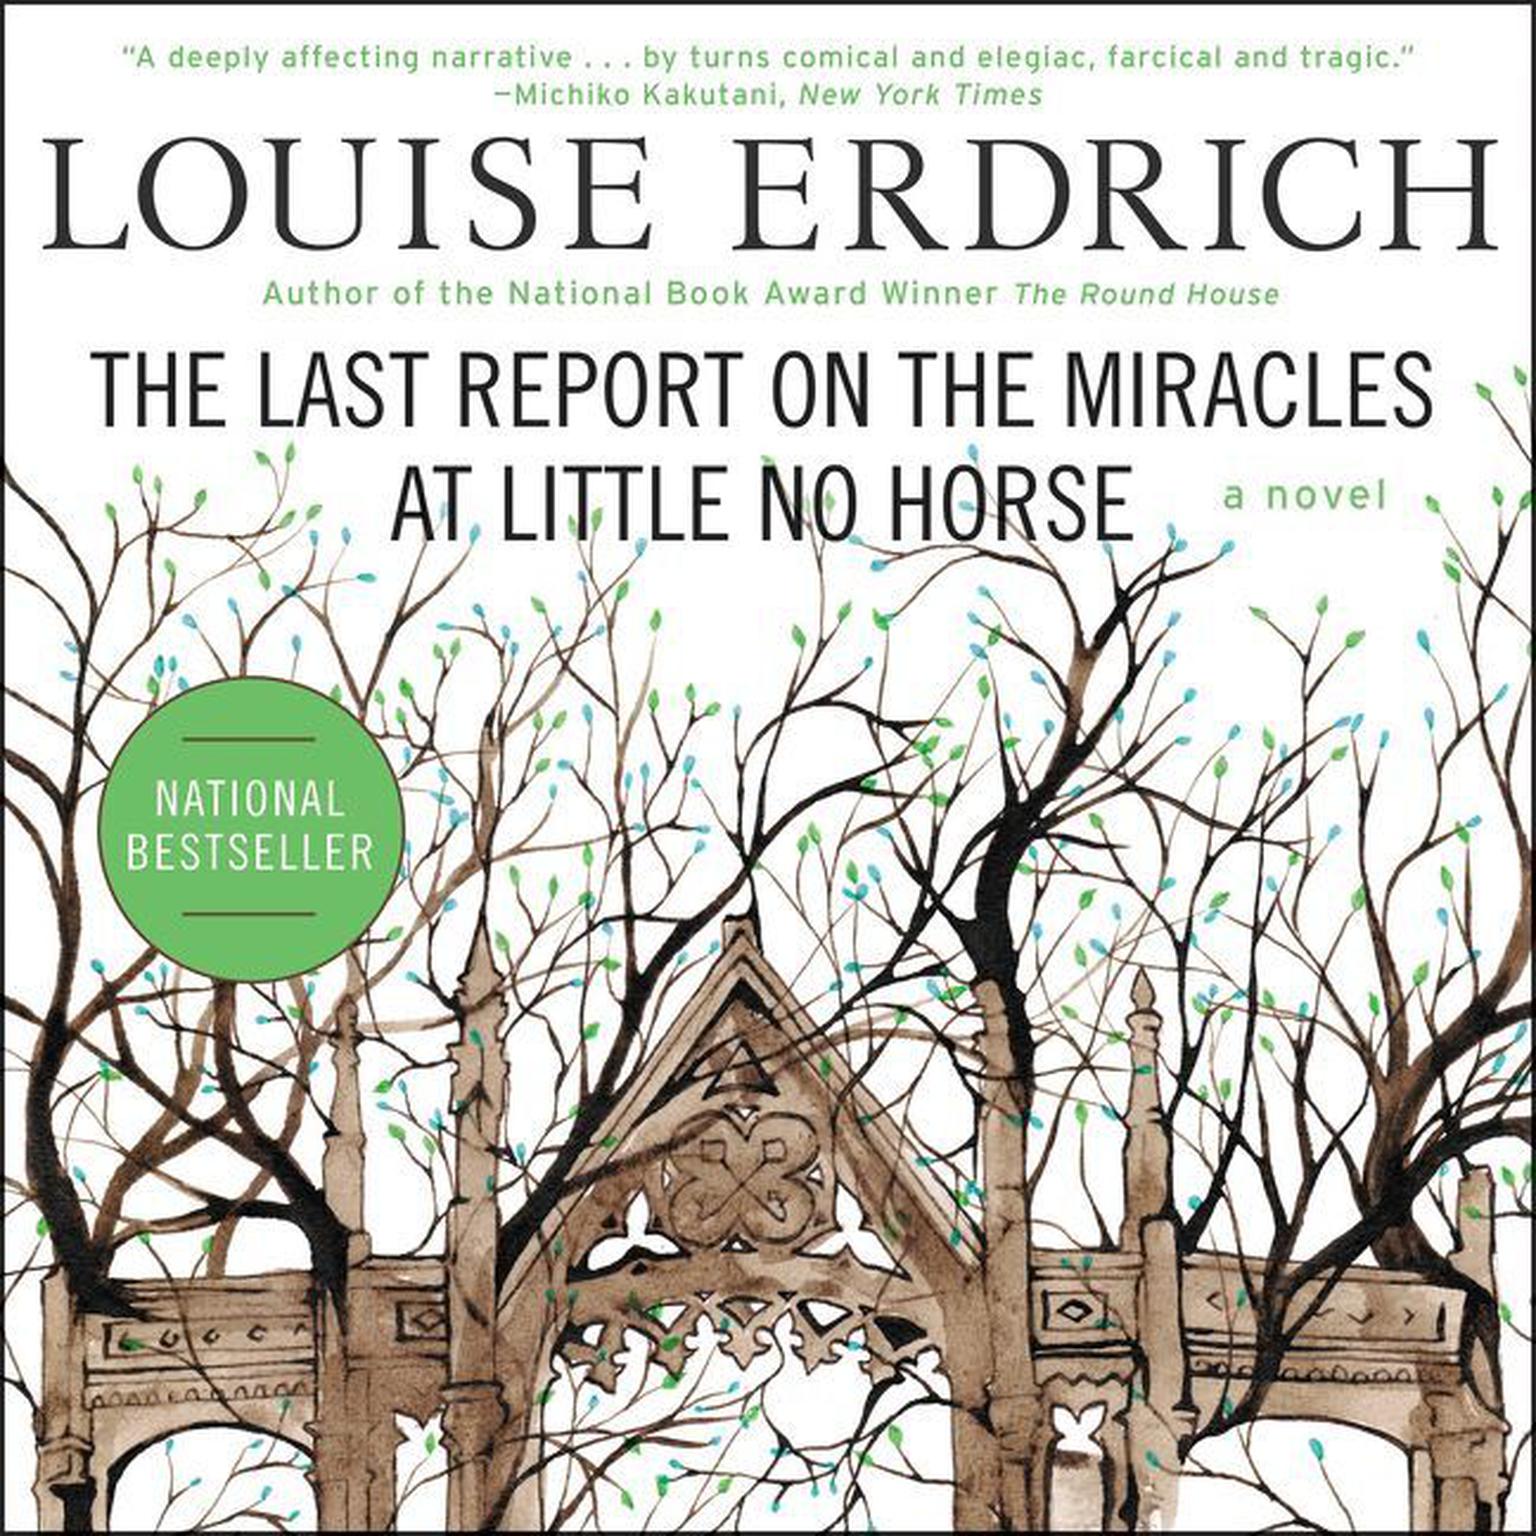 The Last Report on the Miracles at Little No Horse Audiobook, by Louise Erdrich